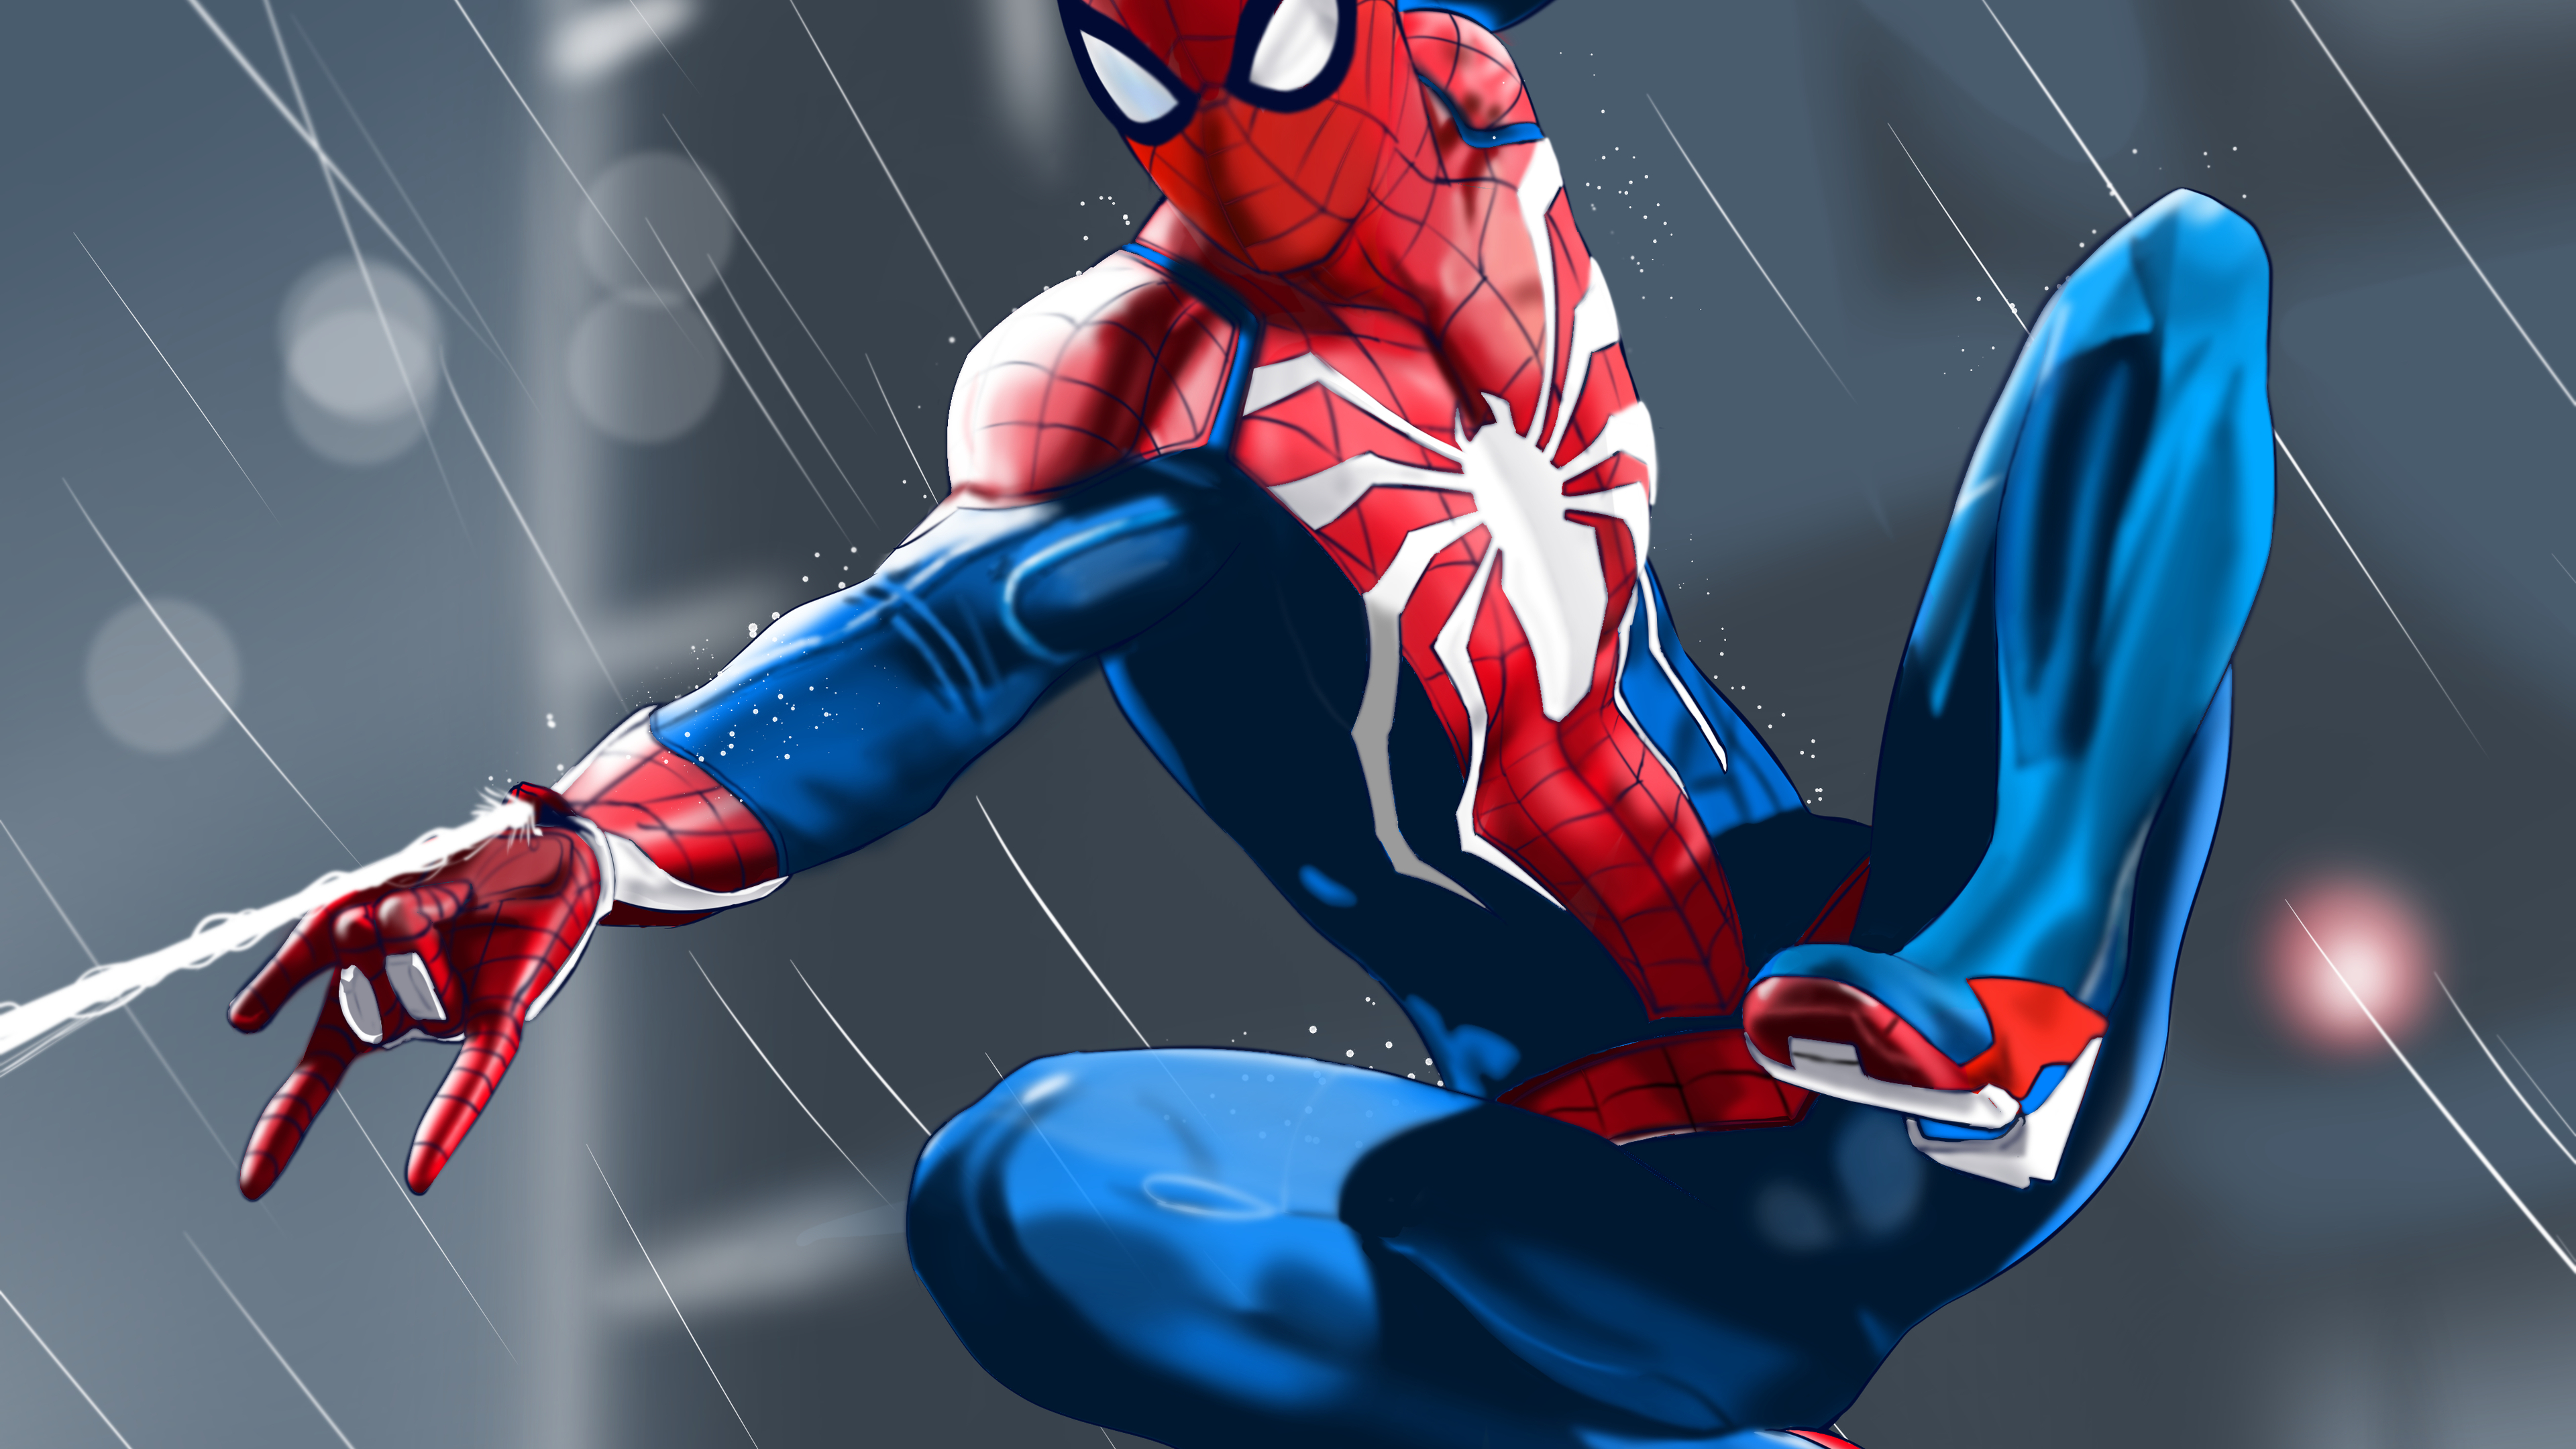 Spider Man in the city Wallpaper 4k Ultra HD ID7816